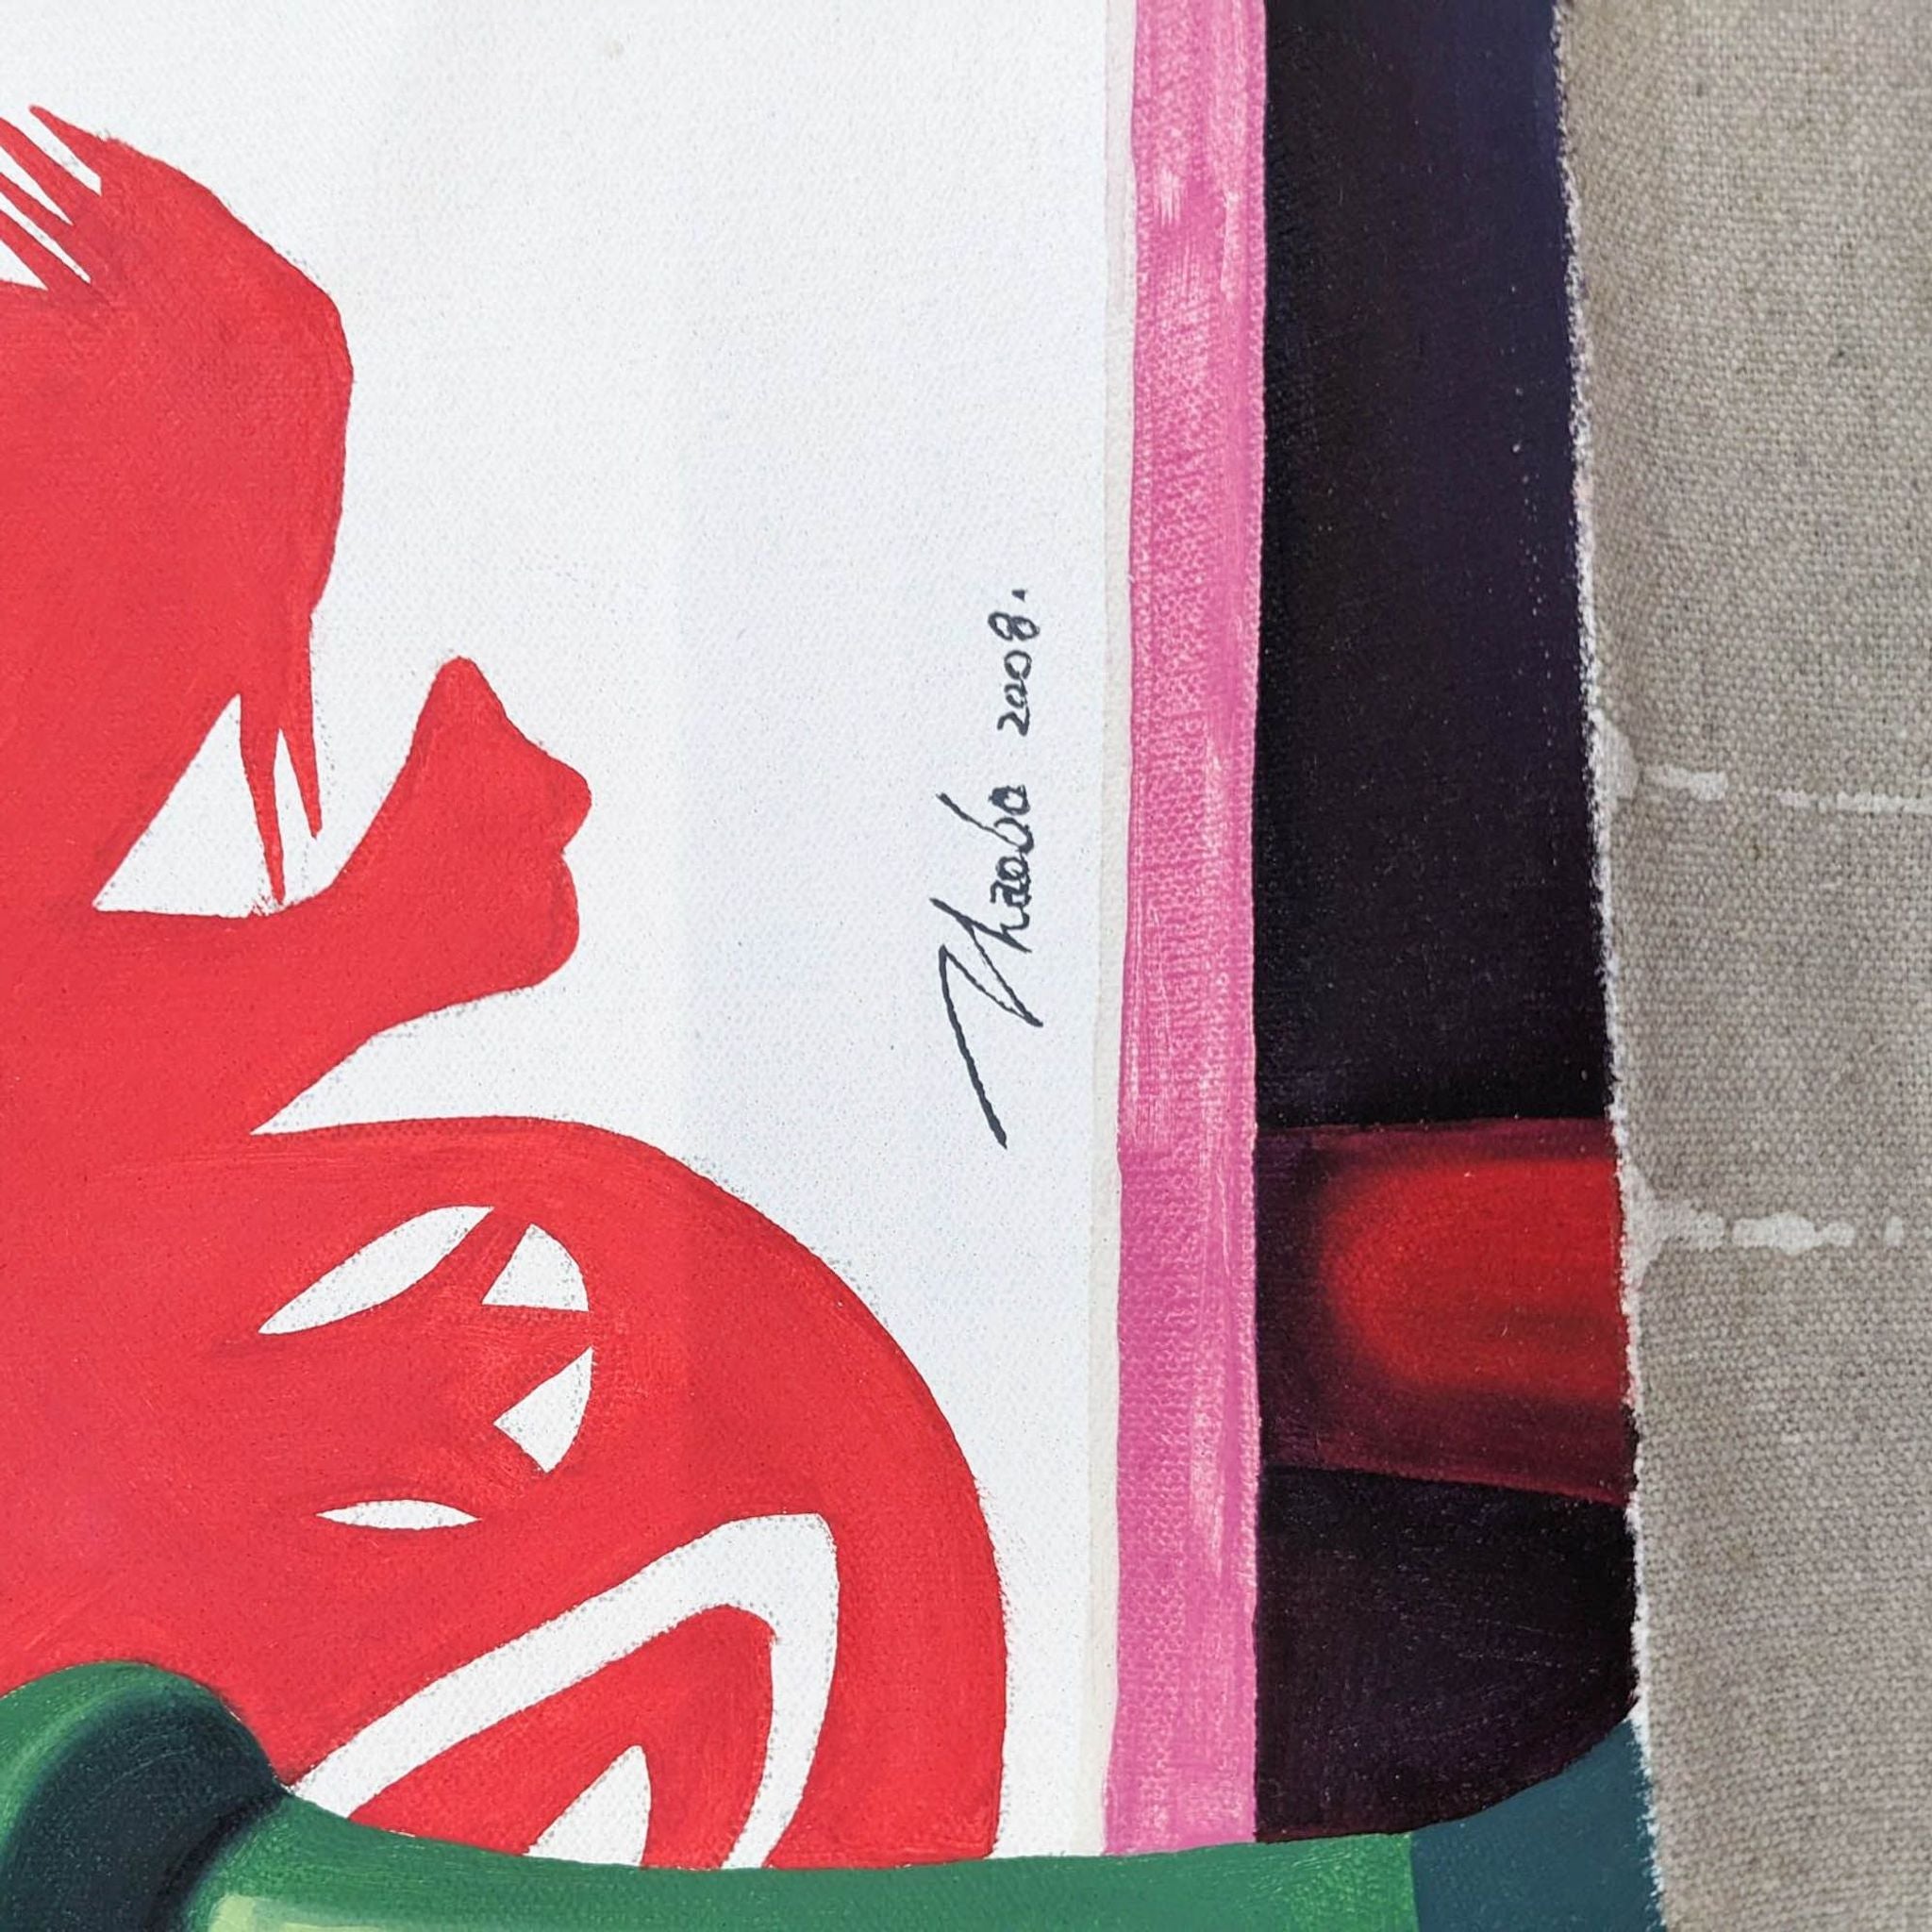 Alt text 2: Close-up on the signature and date, 'Zhao Bo 2008', on a vibrant drawing of cultural and cartoon elements, by Reperch, 78 1/2 by 78 1/2 inches.